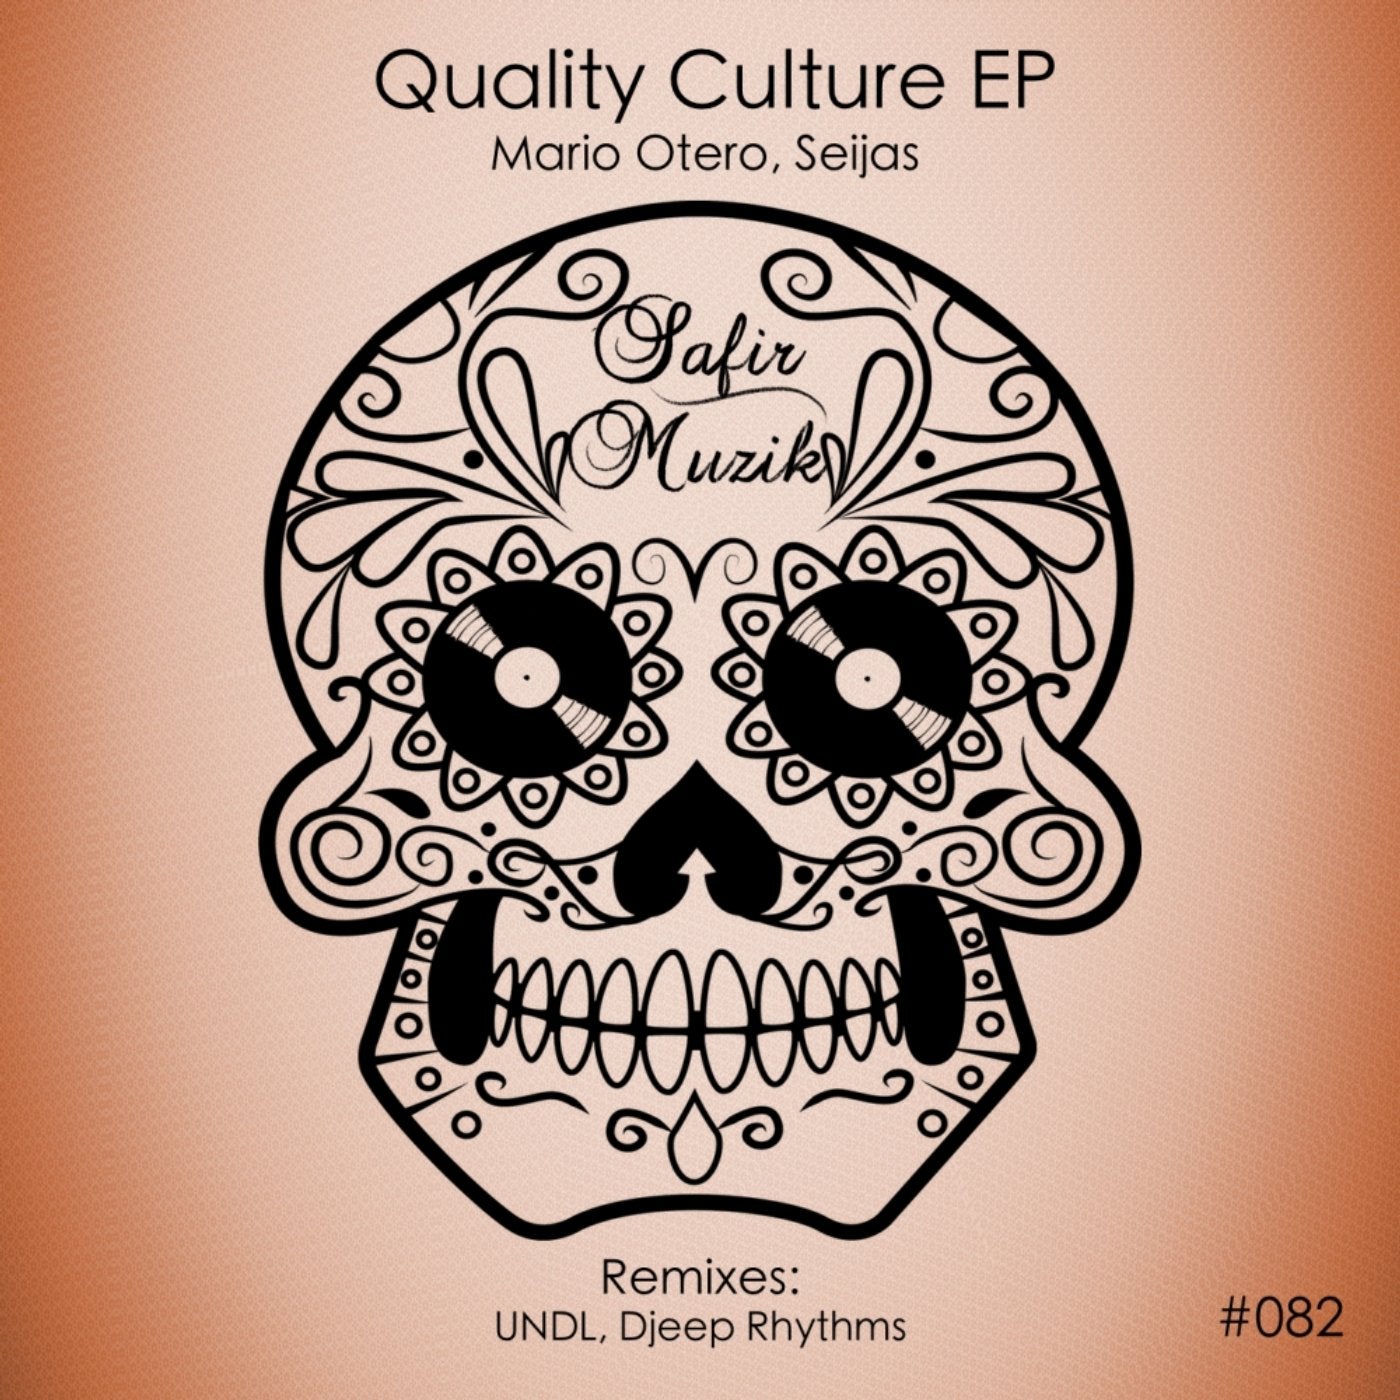 Quality Culture EP